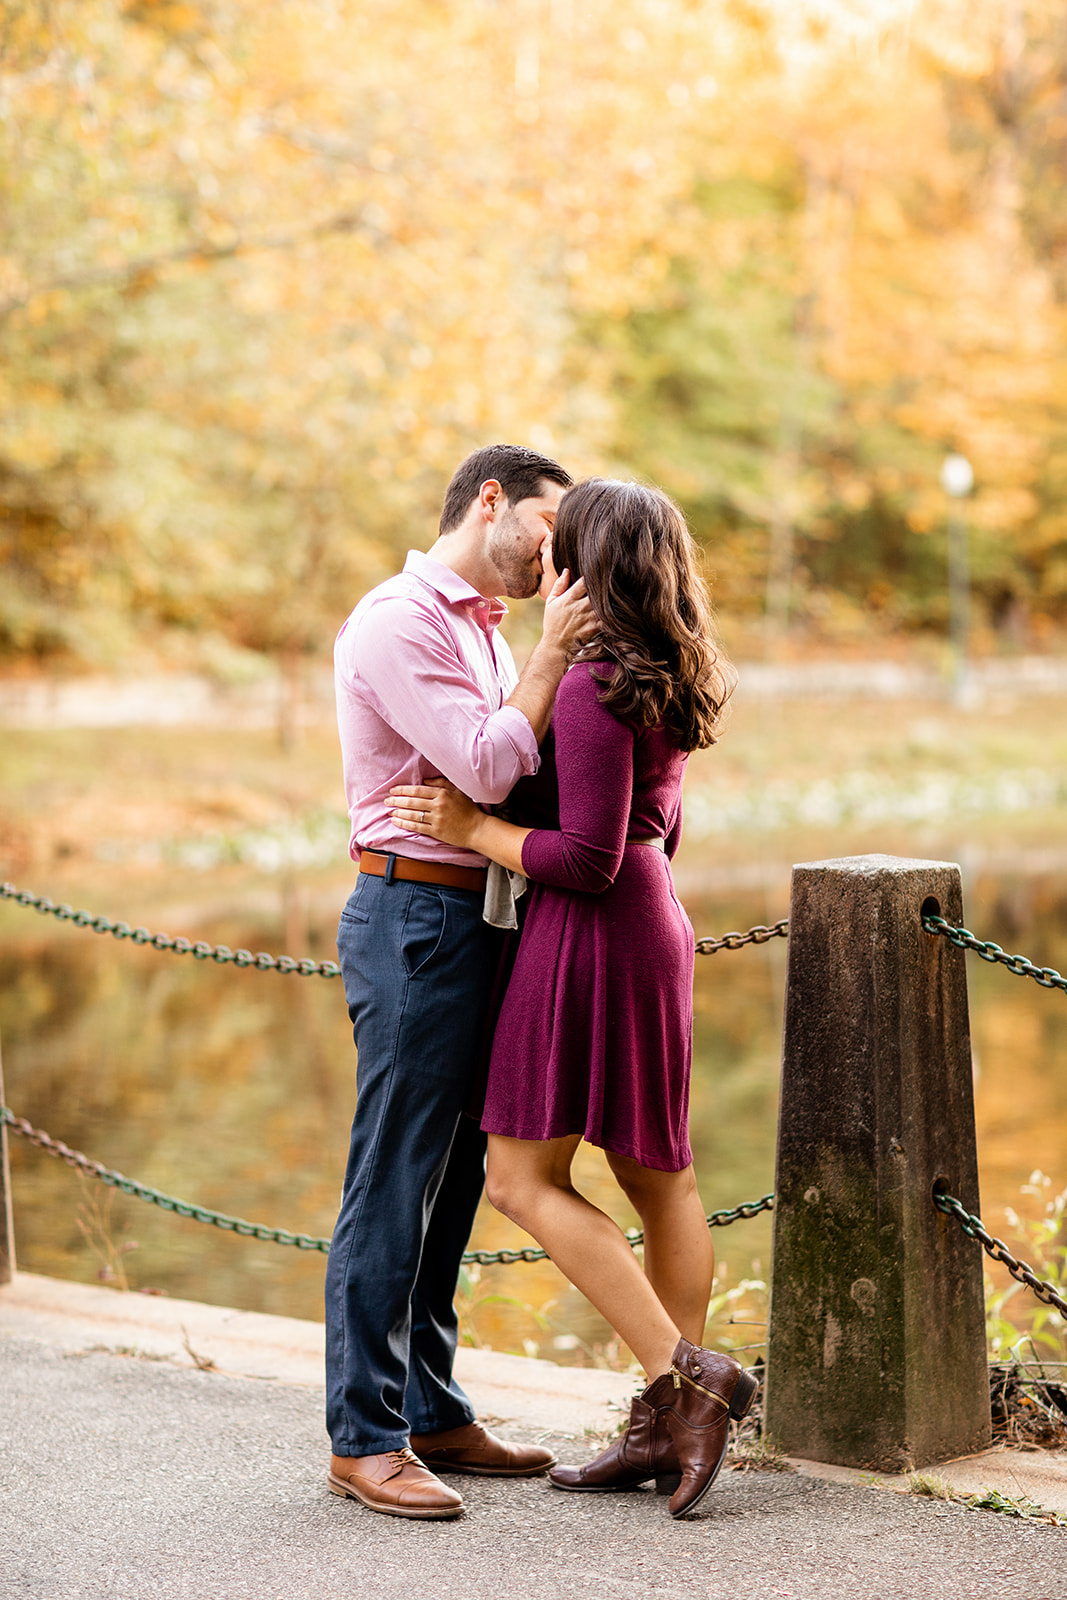 Adam  Taylors Forest Hill Park Fall Engagement Shoot - Image Property of www.j-dphoto.com